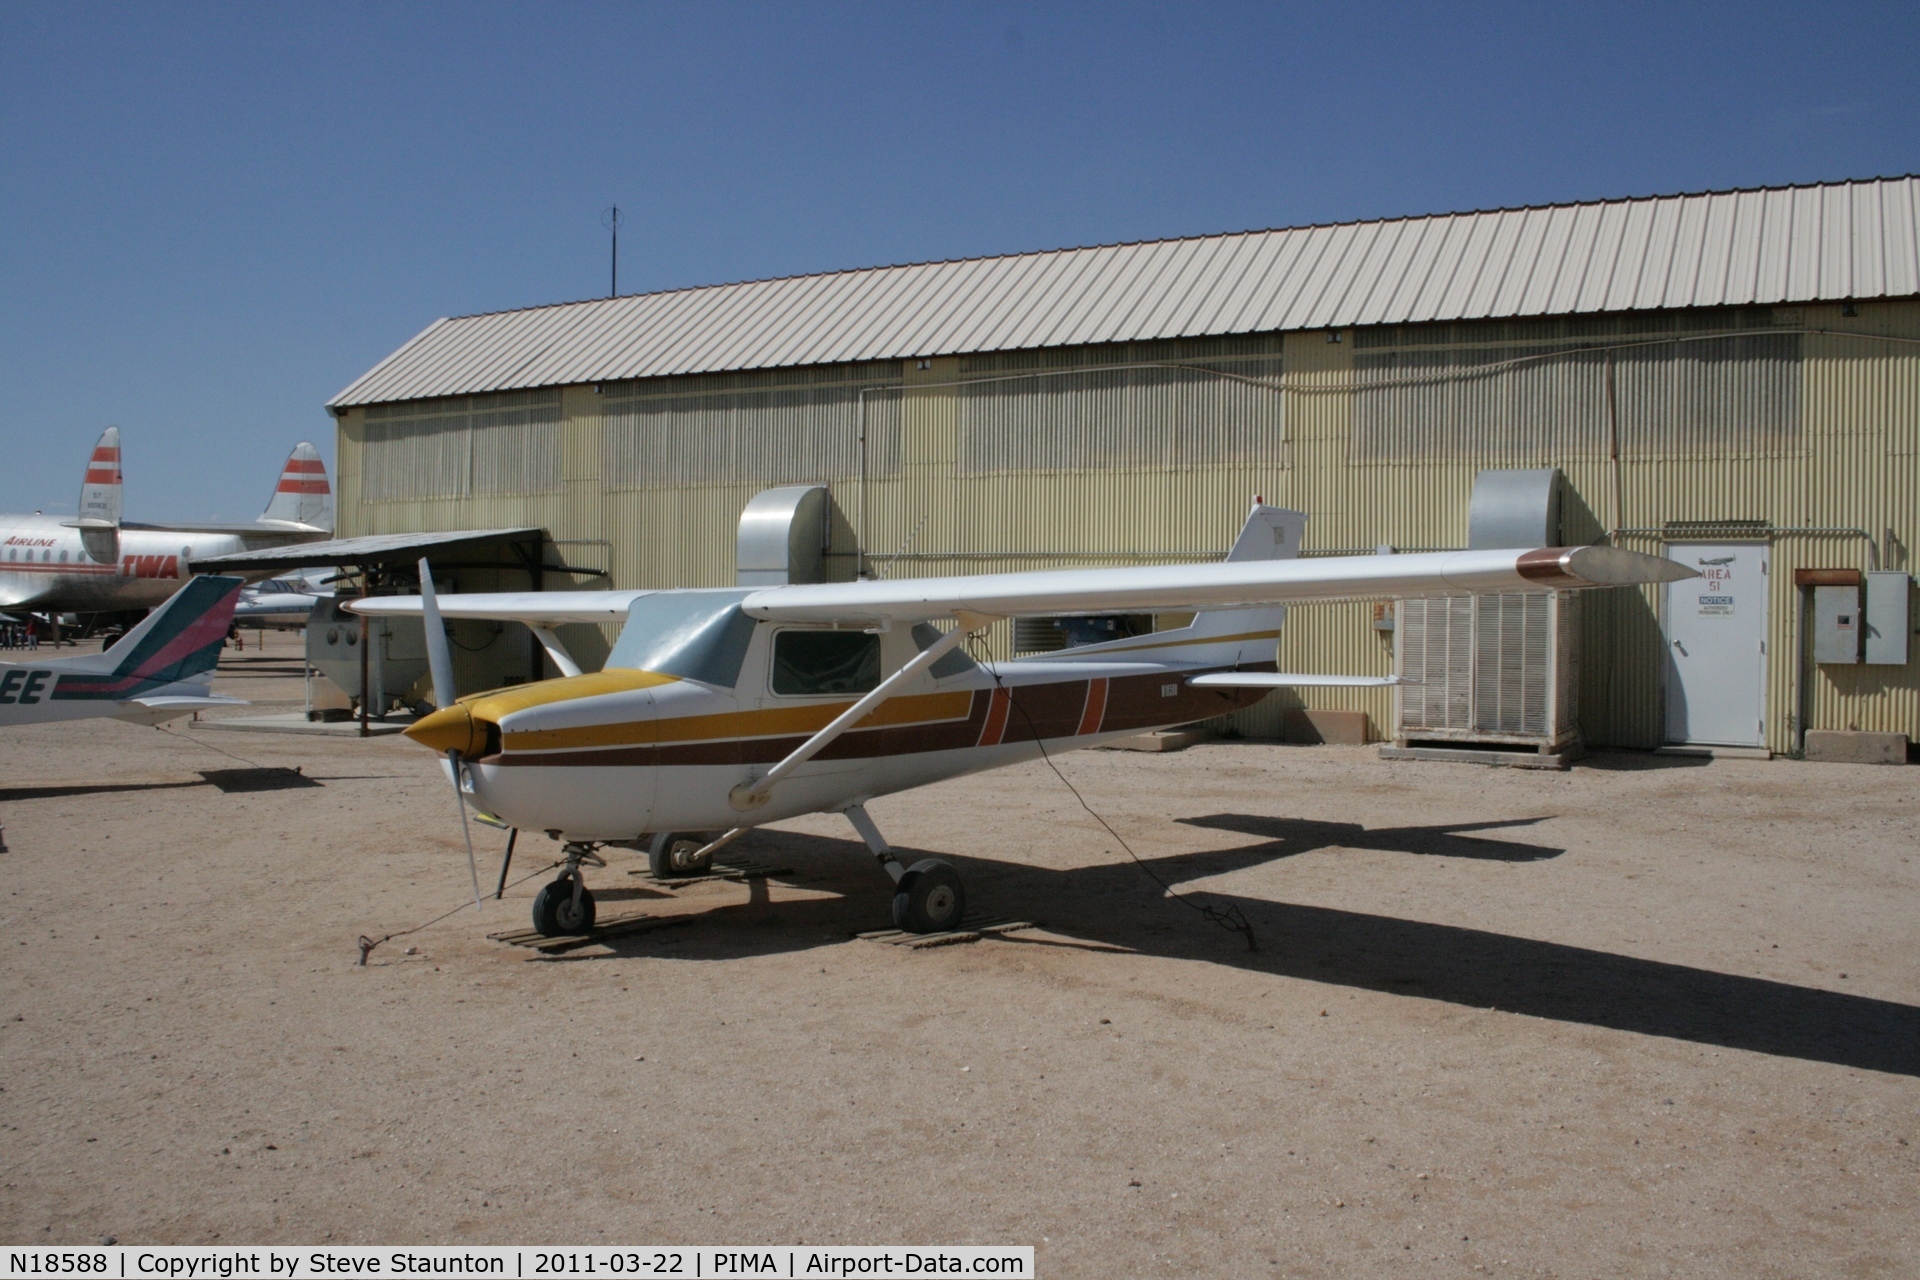 N18588, Cessna 150L C/N 15073966, Taken at Pima Air and Space Museum, in March 2011 whilst on an Aeroprint Aviation tour